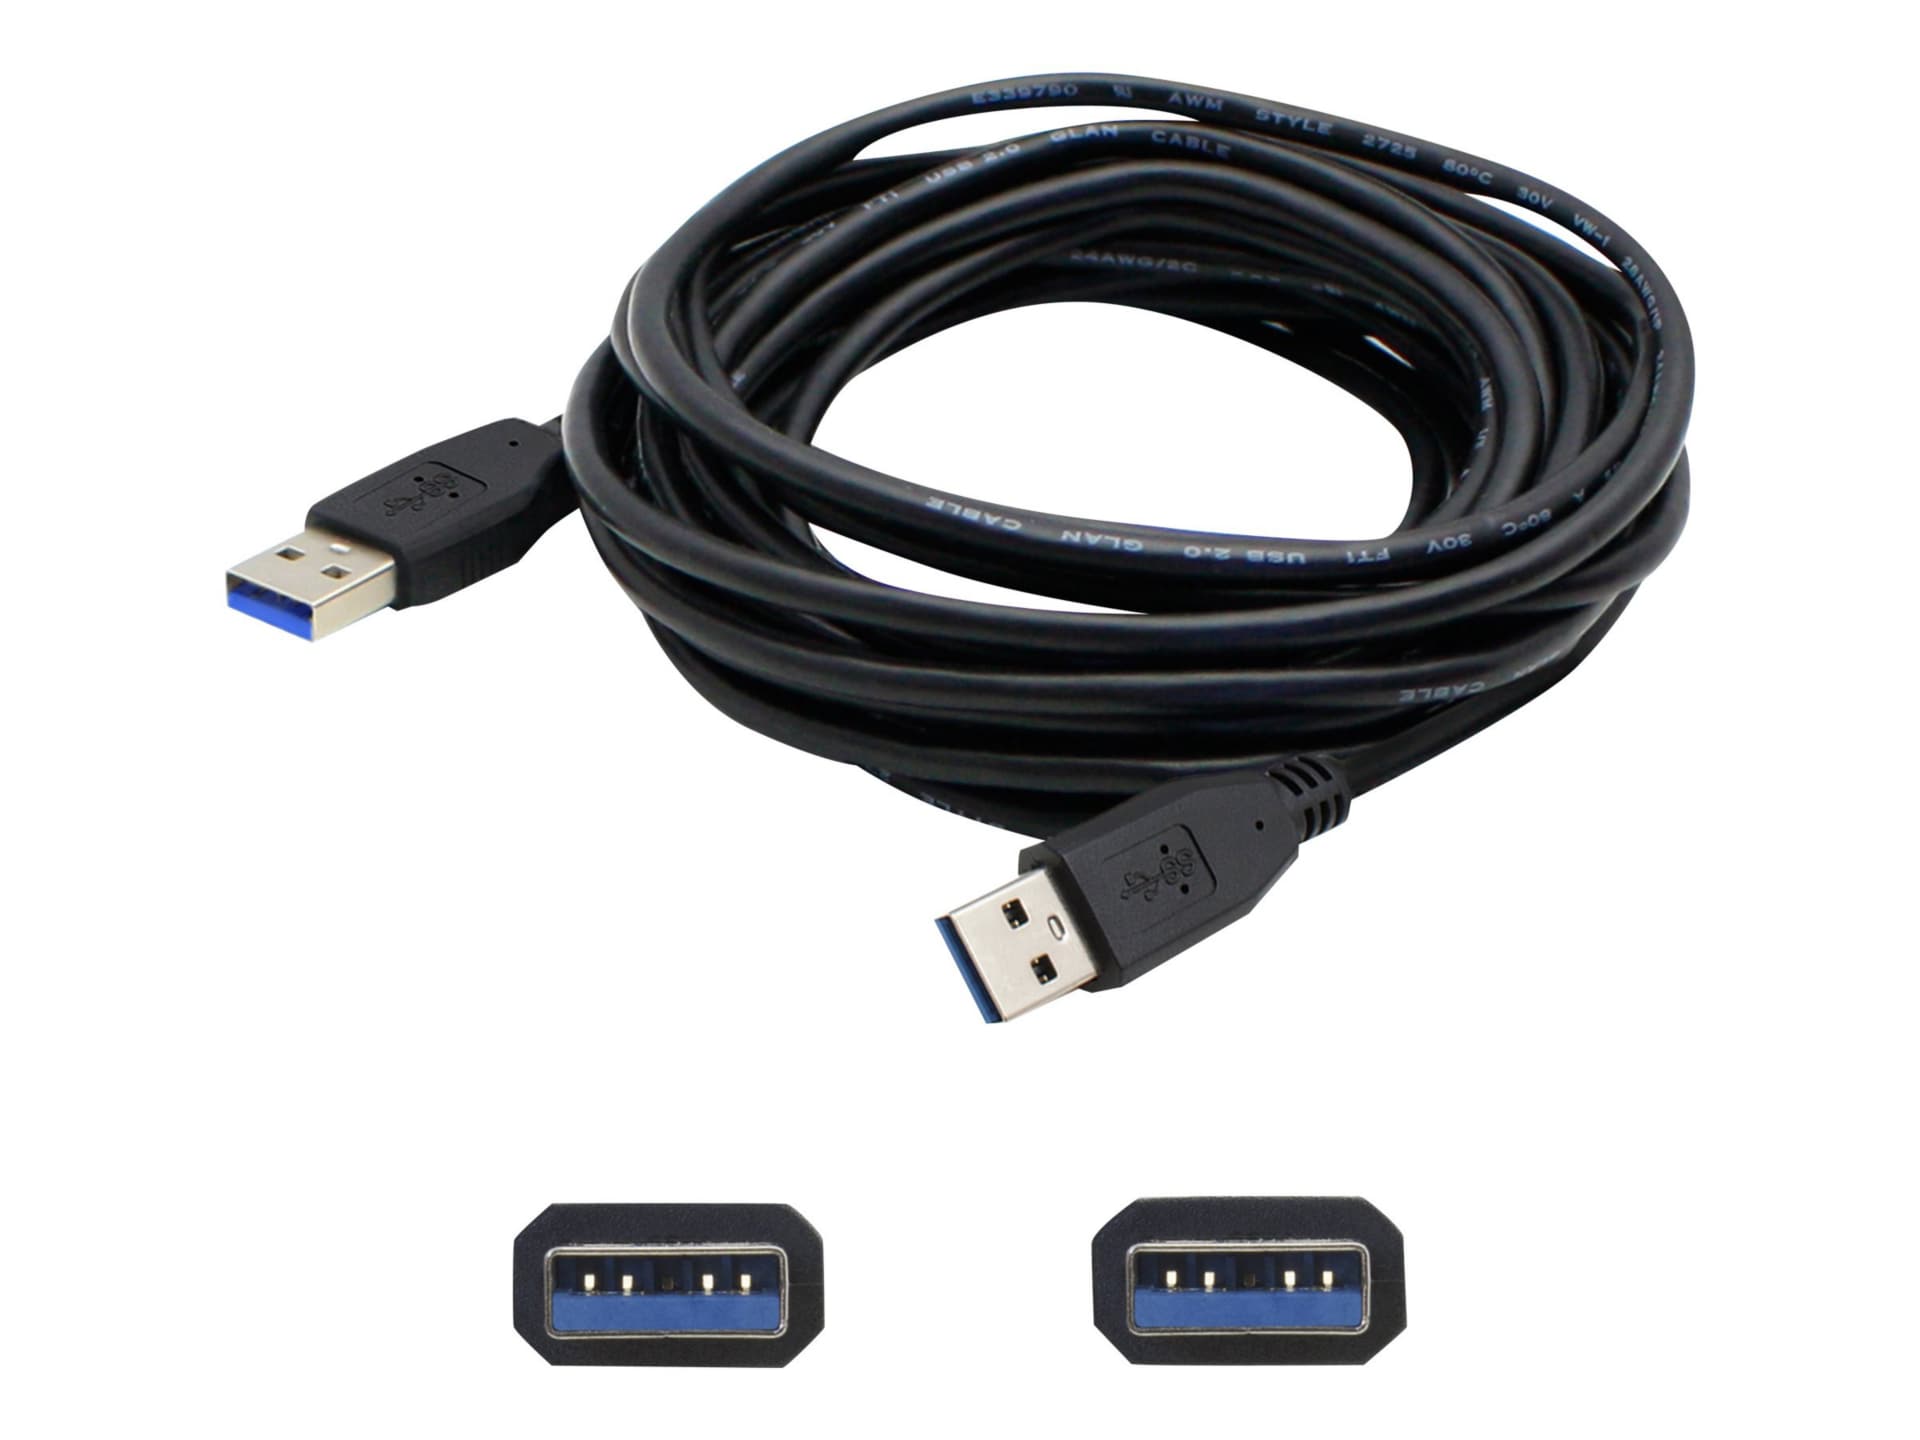 Proline - USB cable - USB Type A to USB Type B - 1 ft